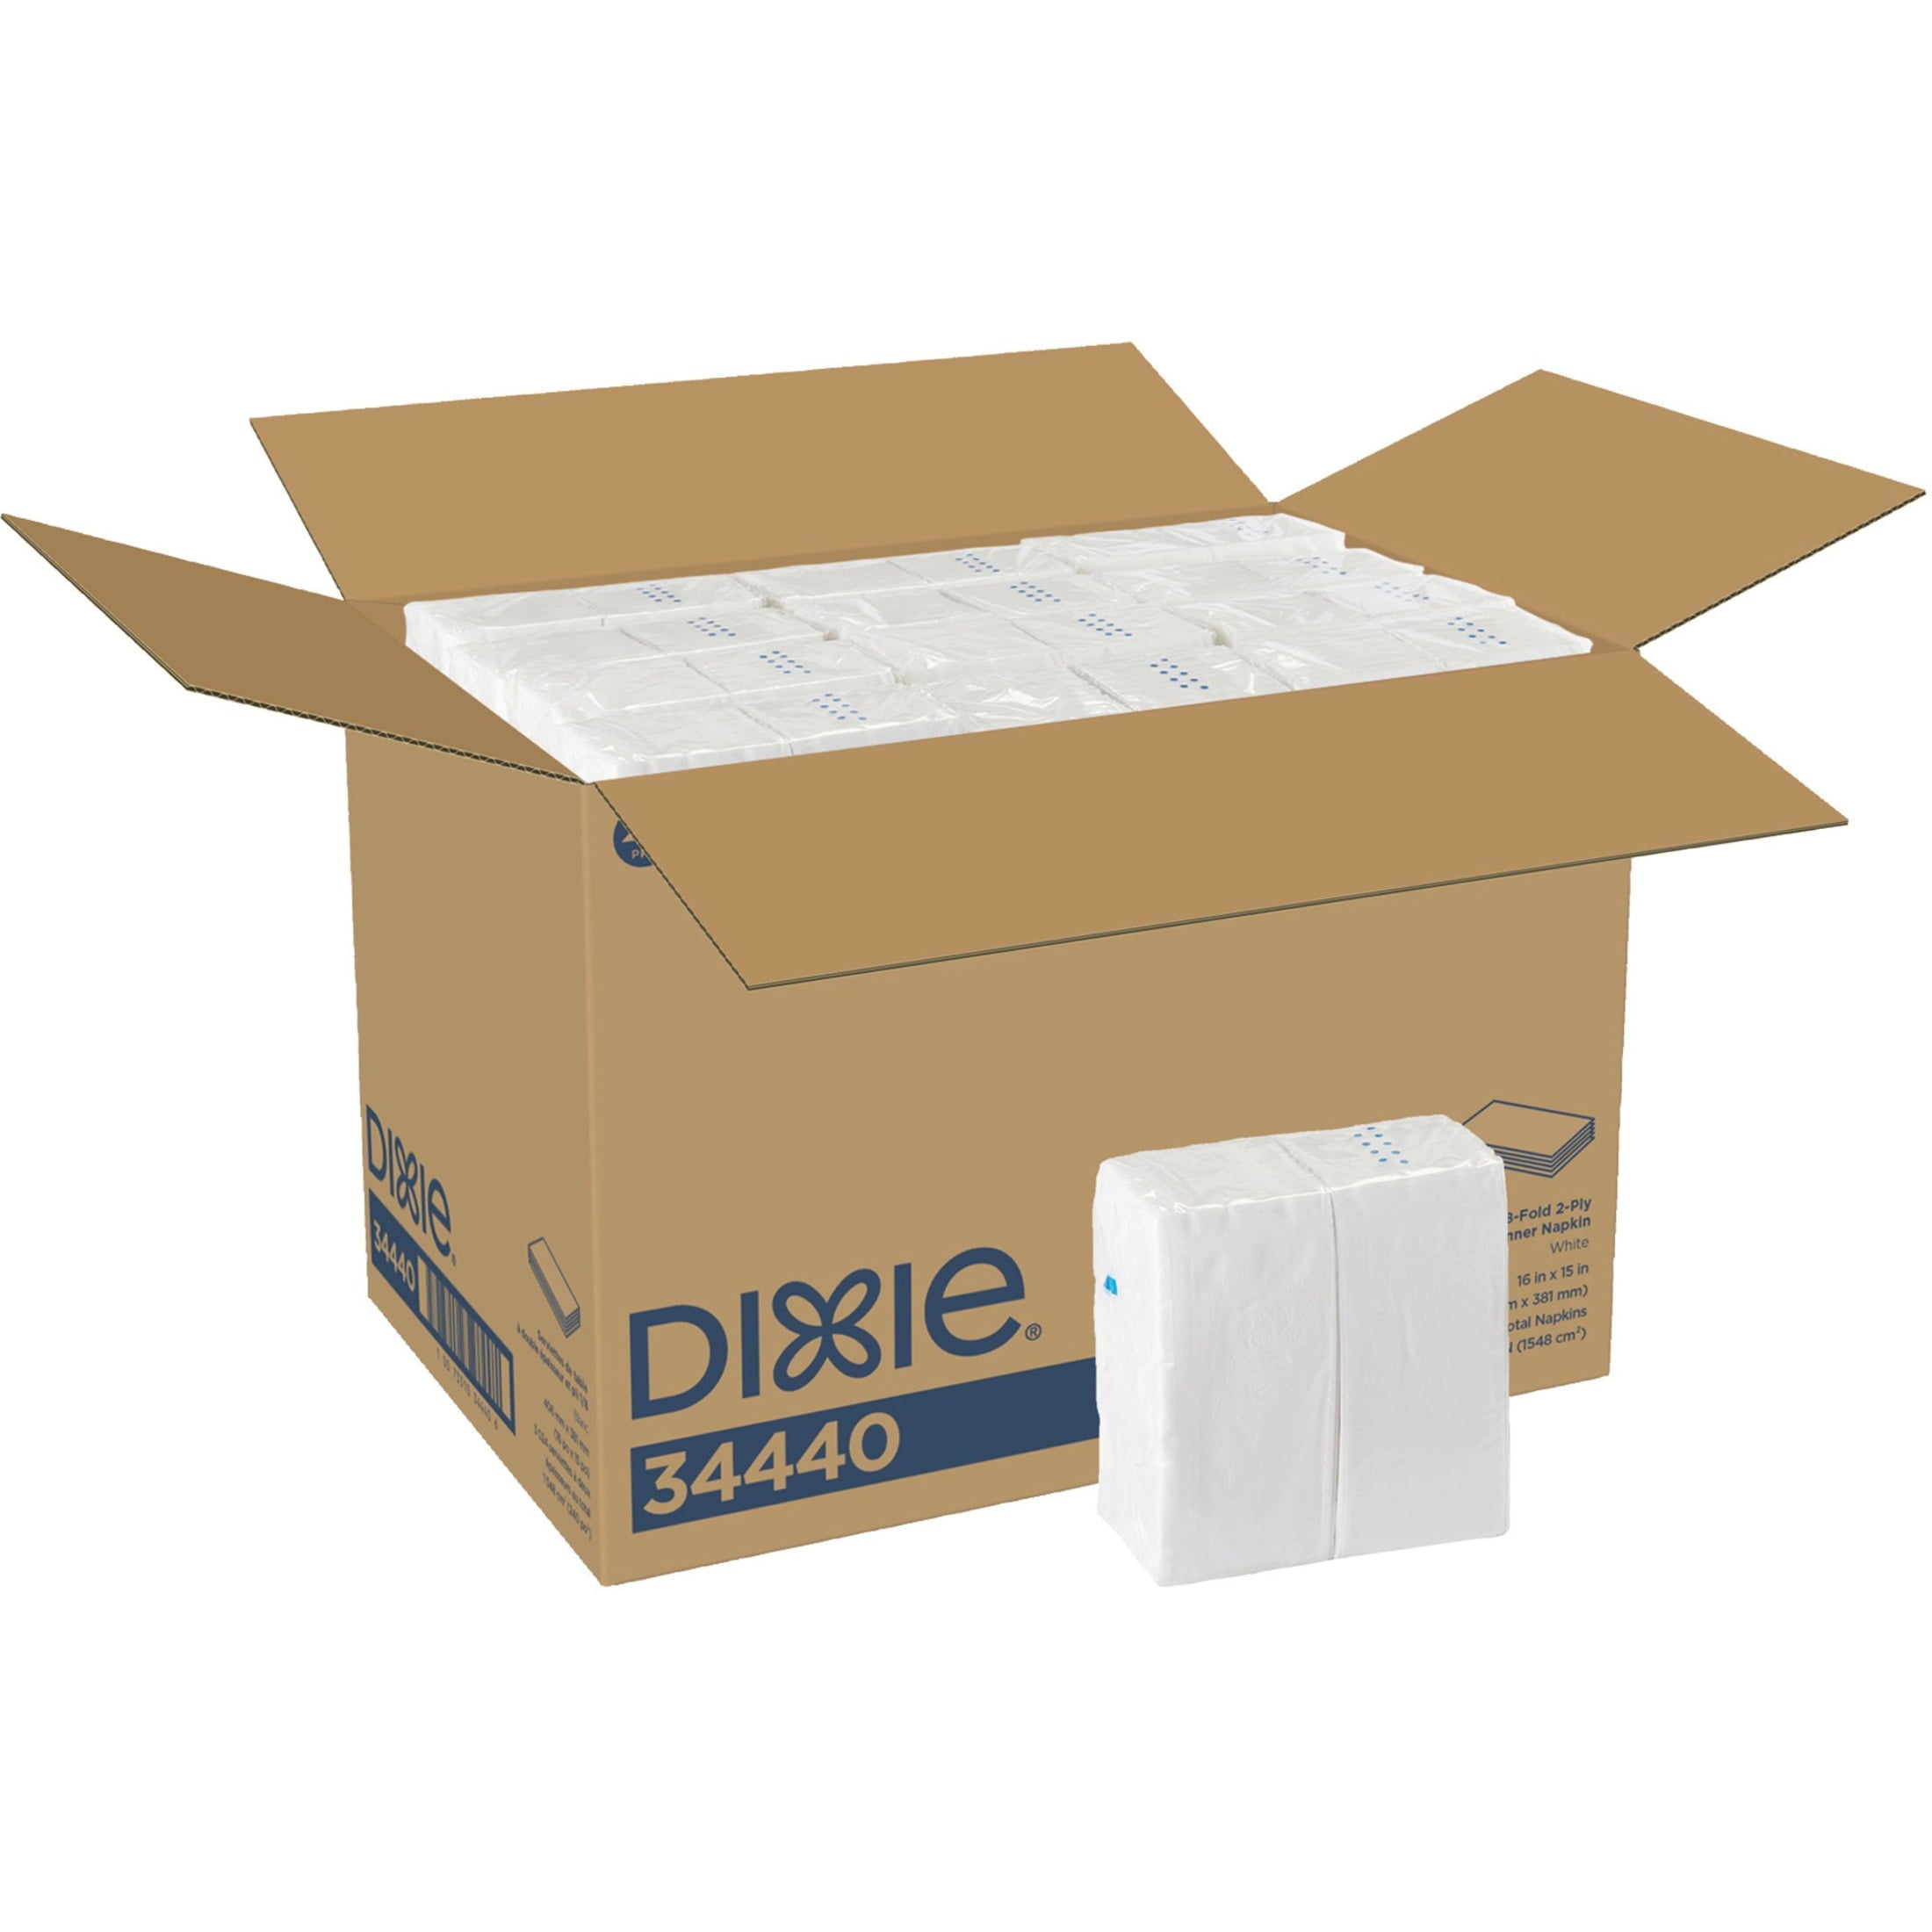 Dixie Ultra Interfold 2-ply Napkin Dispenser Refill Formerly EasyNap GP Pro for sale online 